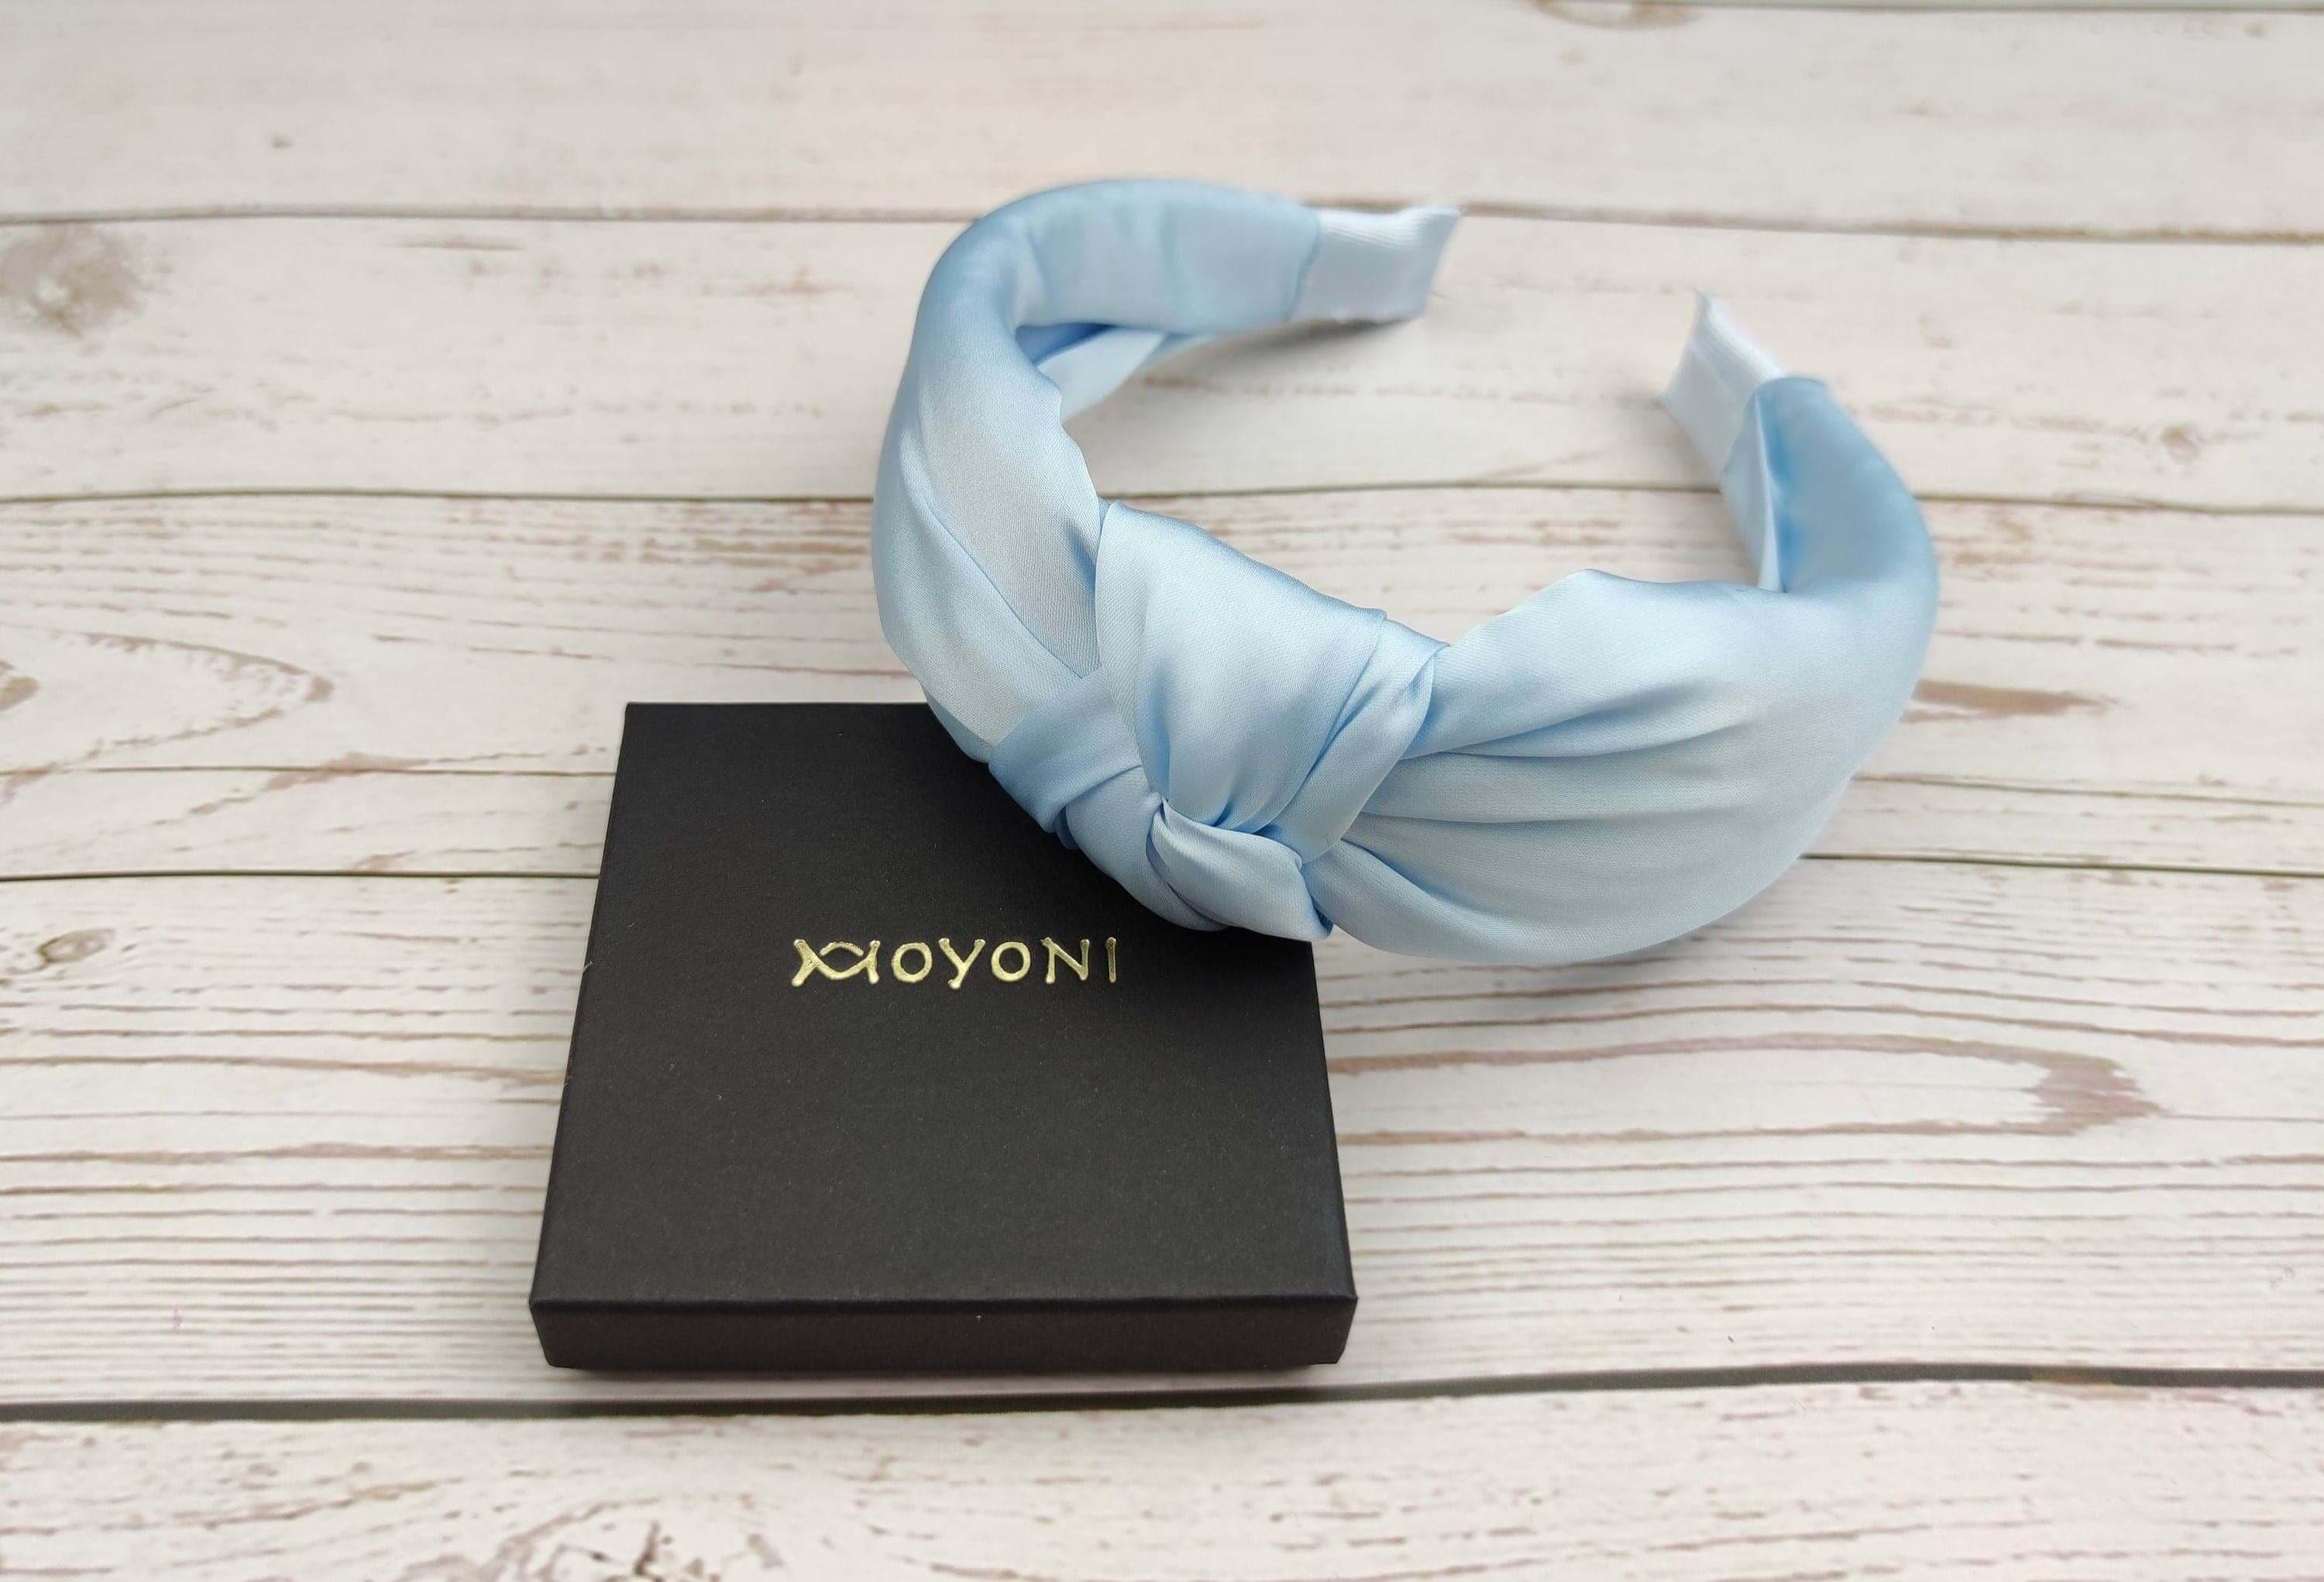 High-Quality Light Blue Satin Padded Knotted Headband for Women - Baby Blue Color Stylish and Fashionable Hair Accessory available at Moyoni Design